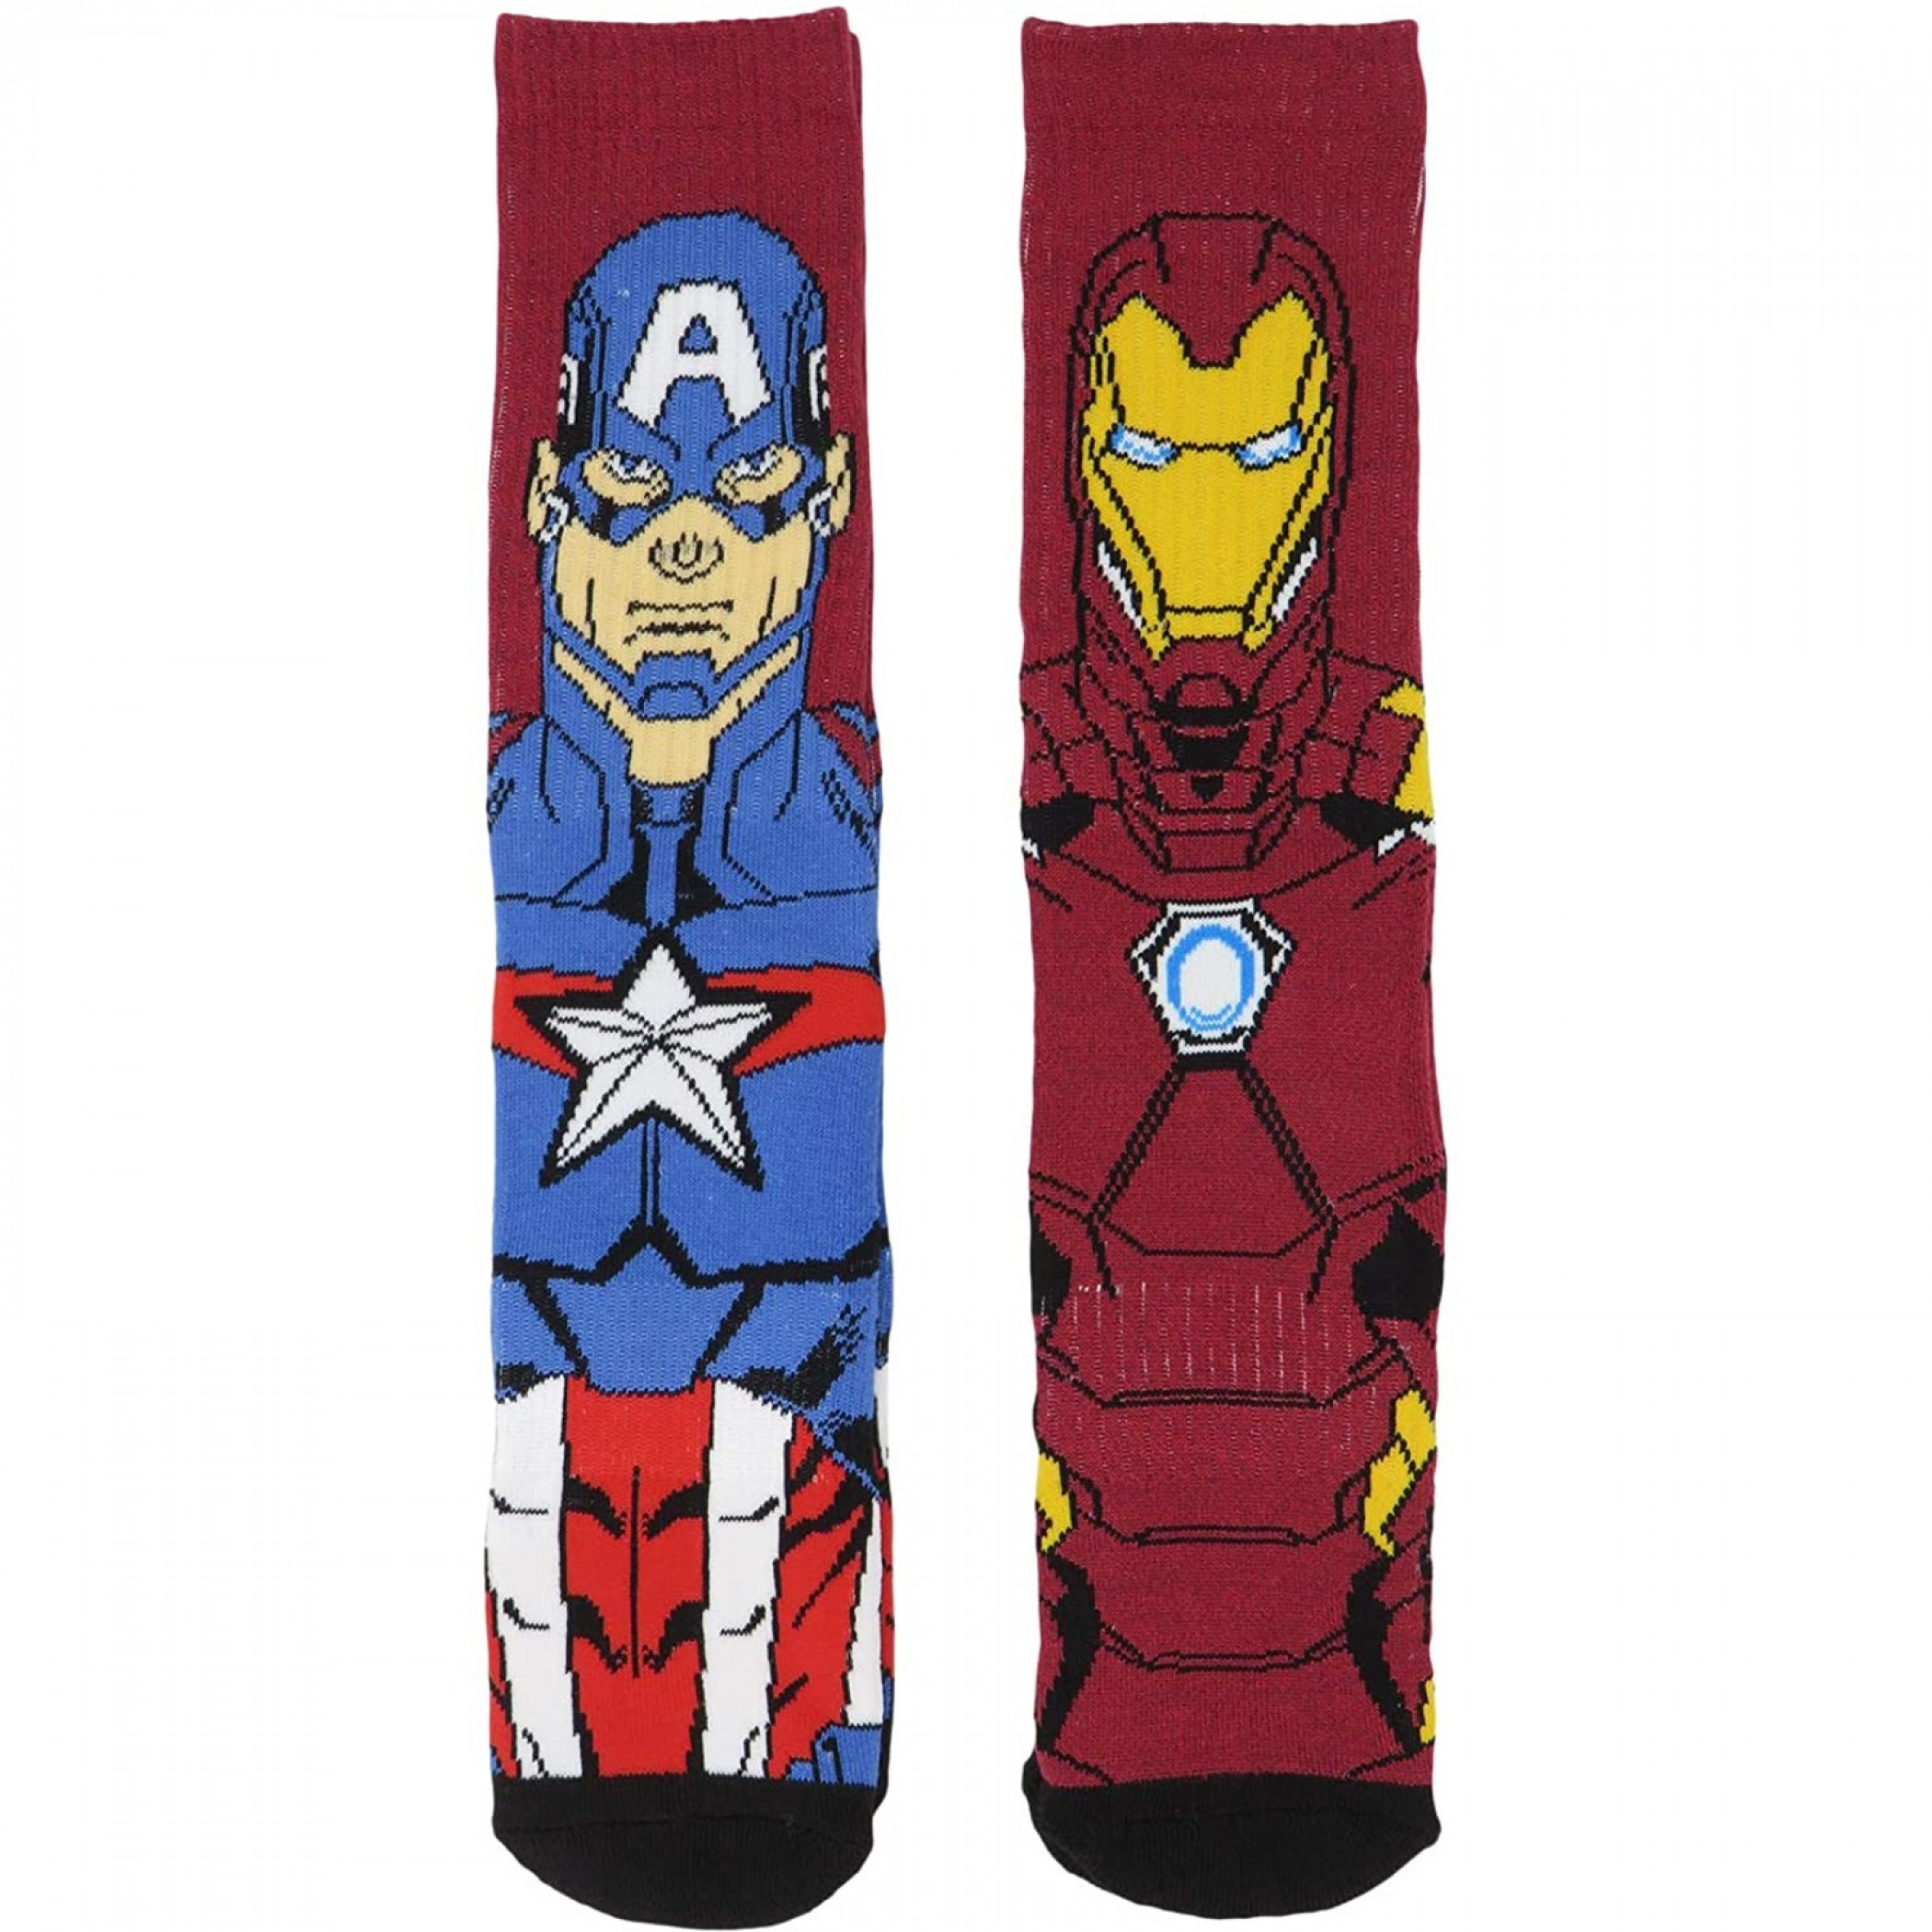 Captain America and Iron Man Character Image 2-Pair Pack of Athletic Socks